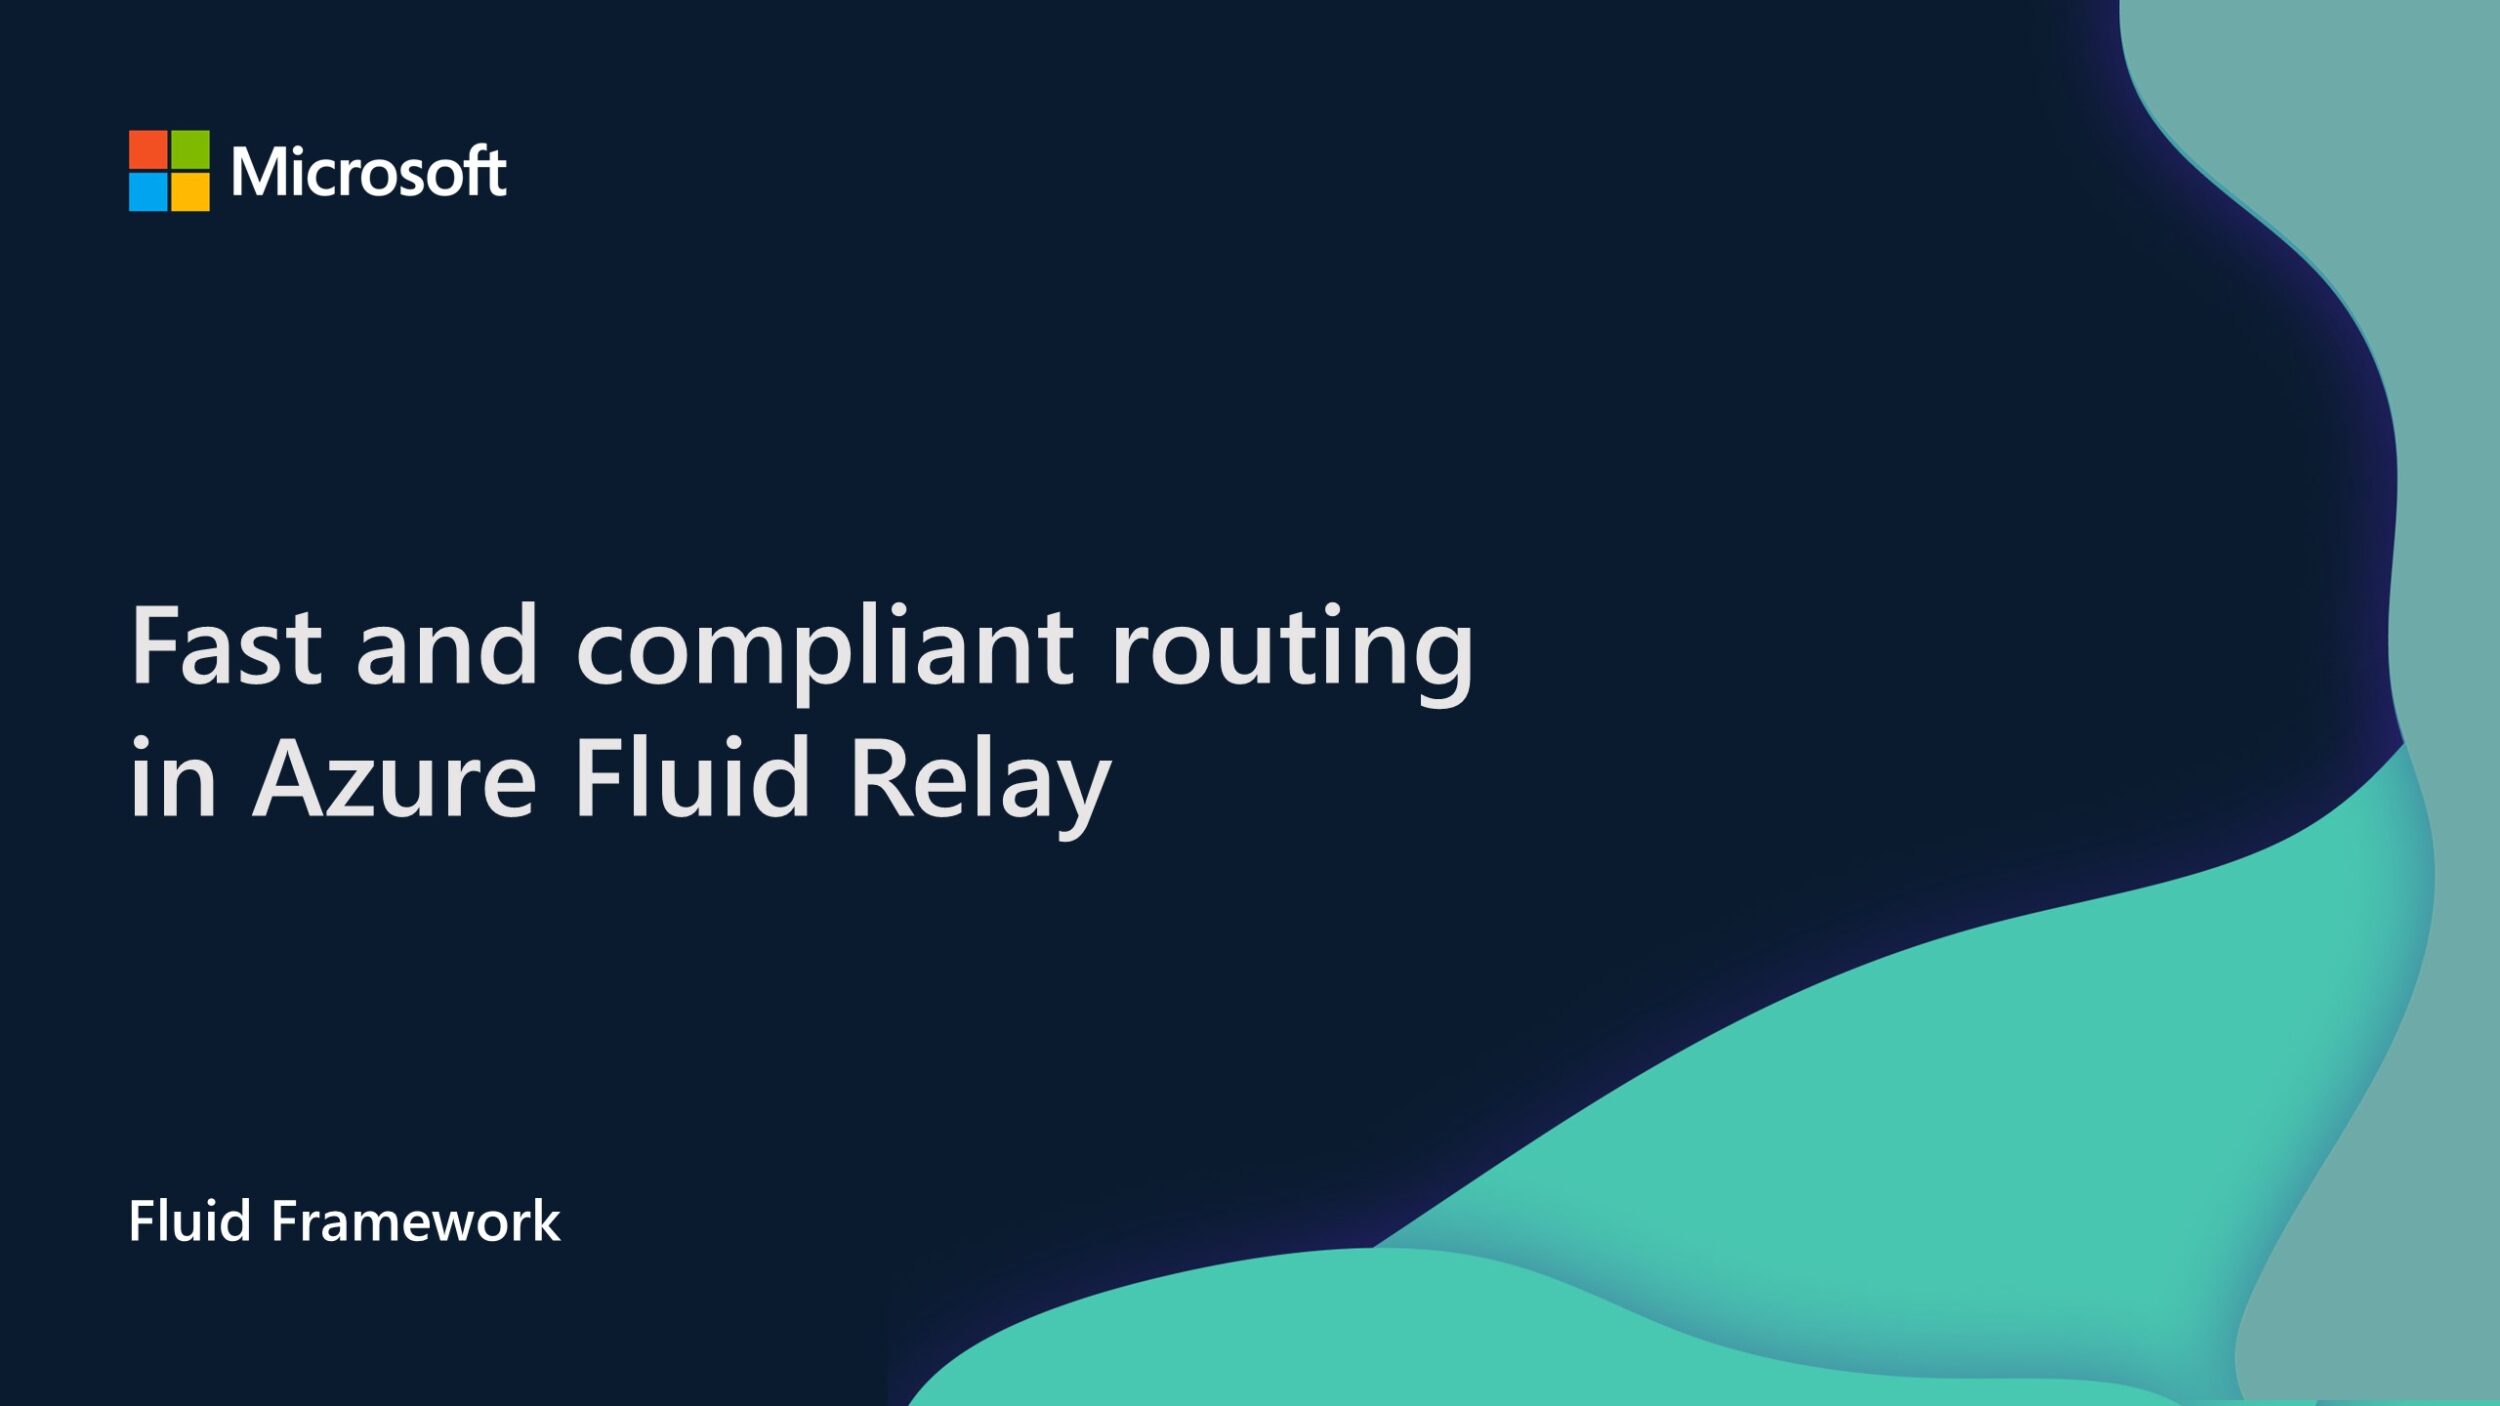 Fast and compliant routing in Azure Fluid Relay